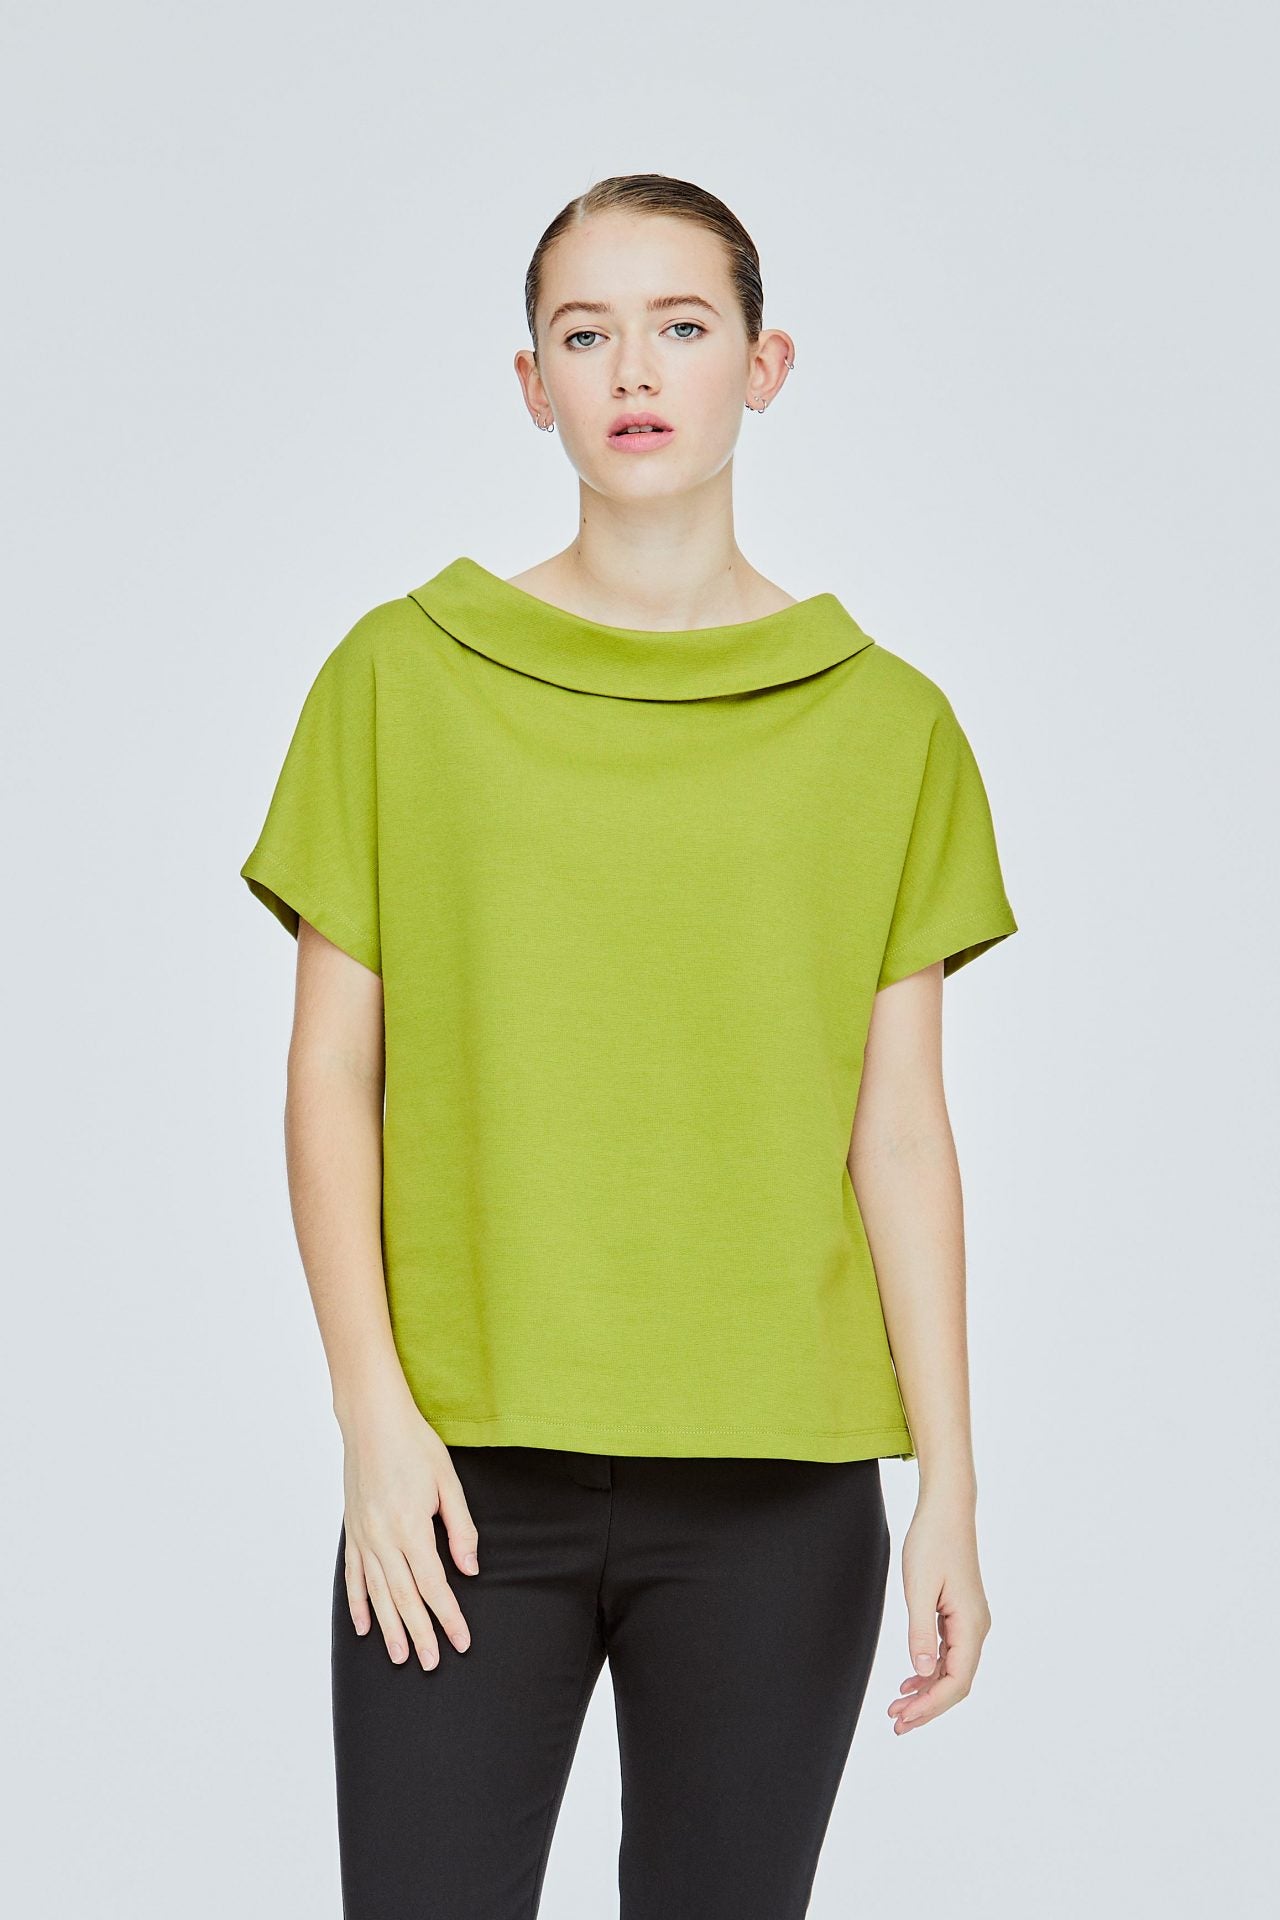 AT 7734 CUFFED NECK TOP OLIVE